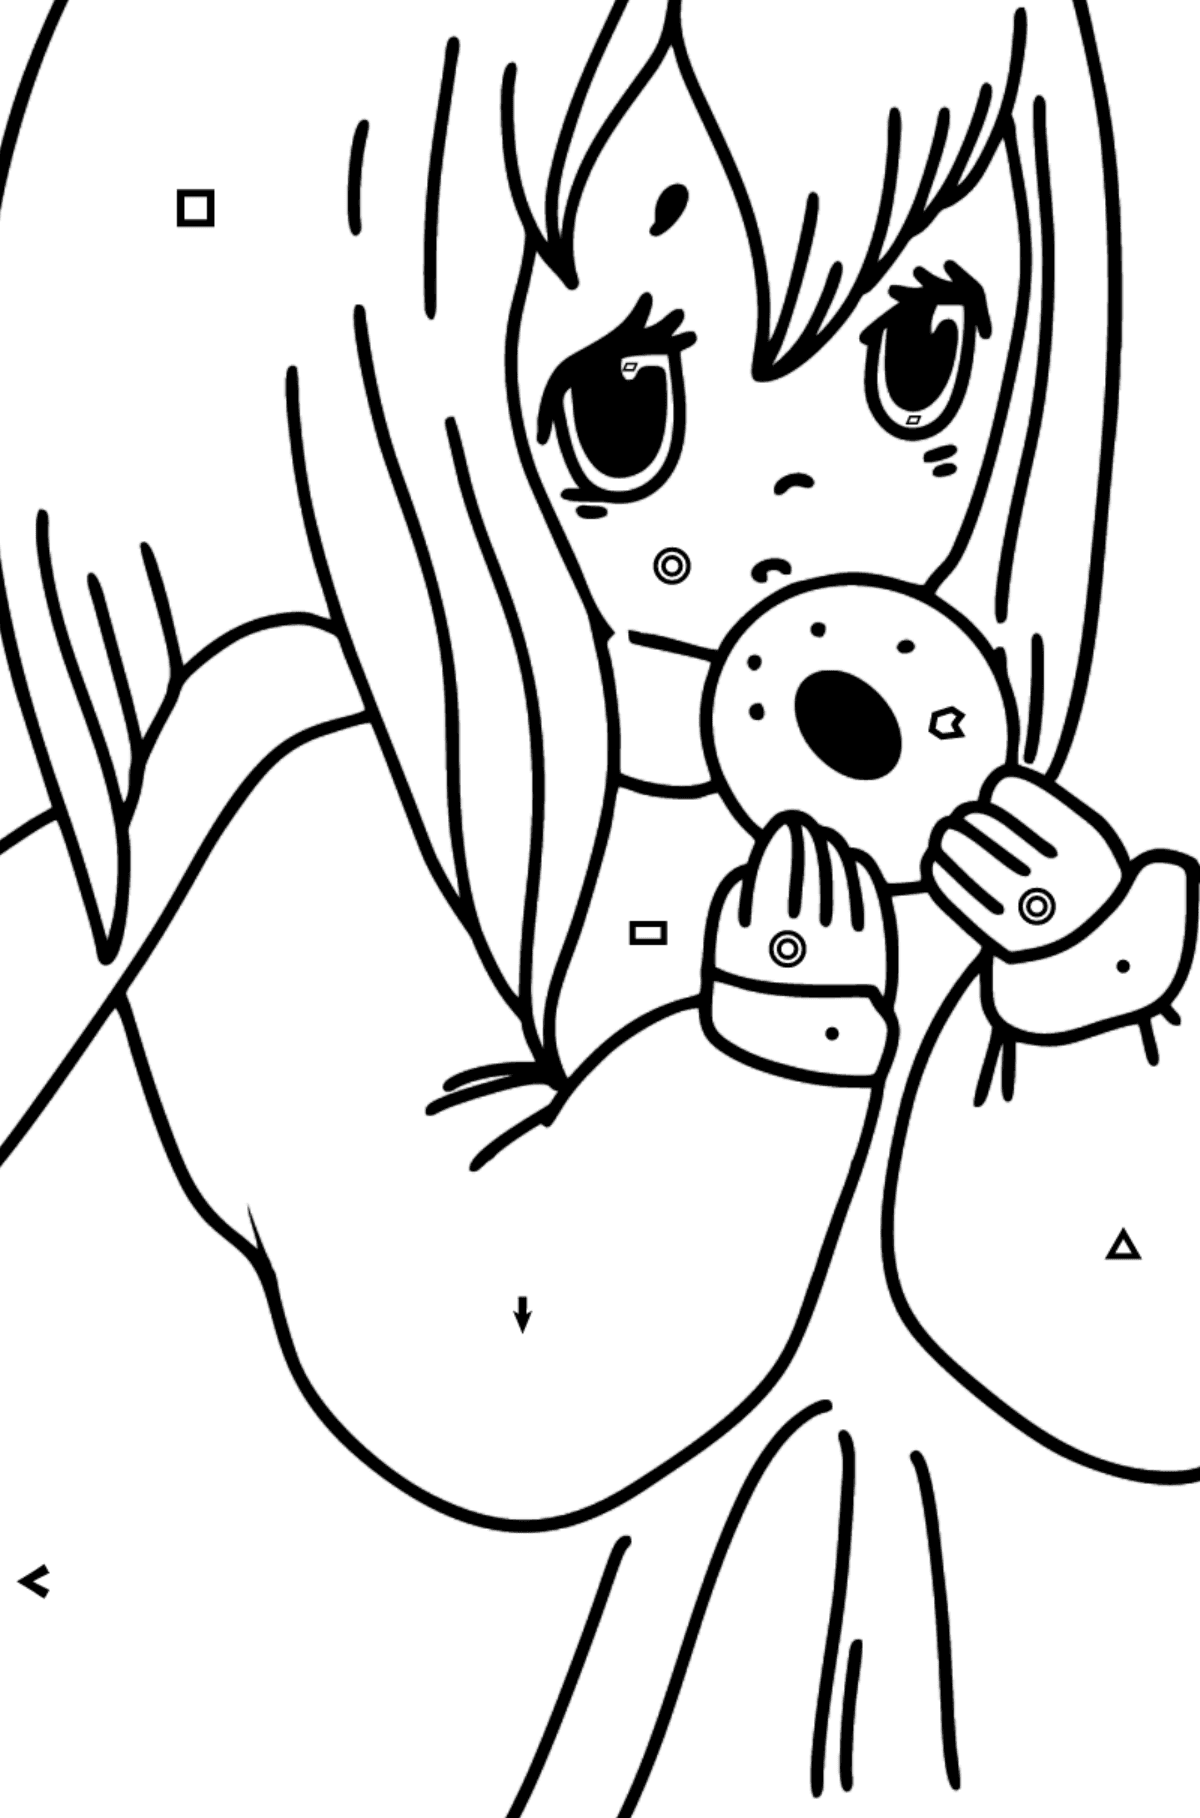 Anime Girl with Donut coloring page - Coloring by Symbols and Geometric Shapes for Kids